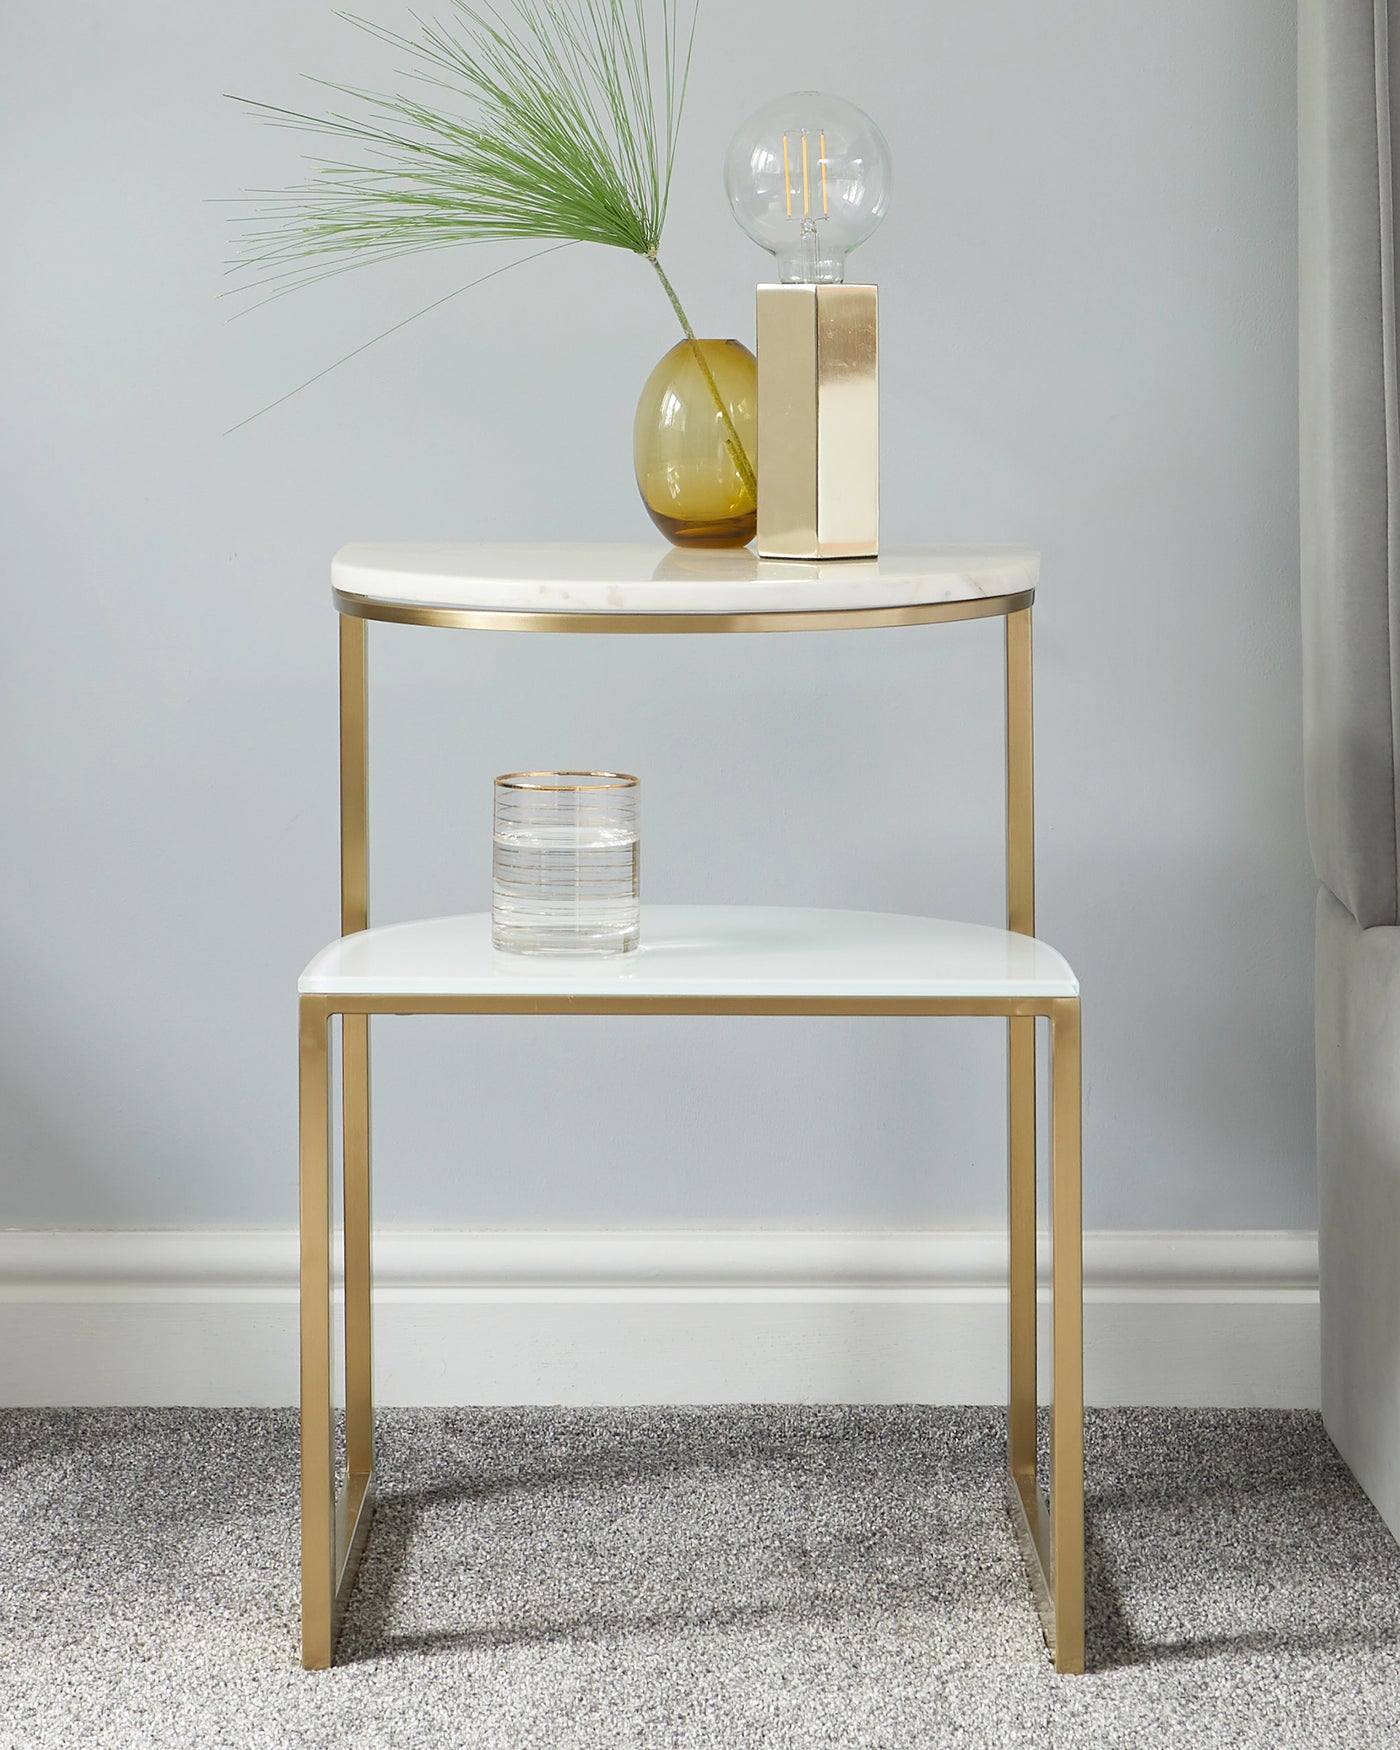 Elegant contemporary two-tier round side table with a white tabletop and gold-finished metal frame, featuring sleek lines and a minimalistic design.